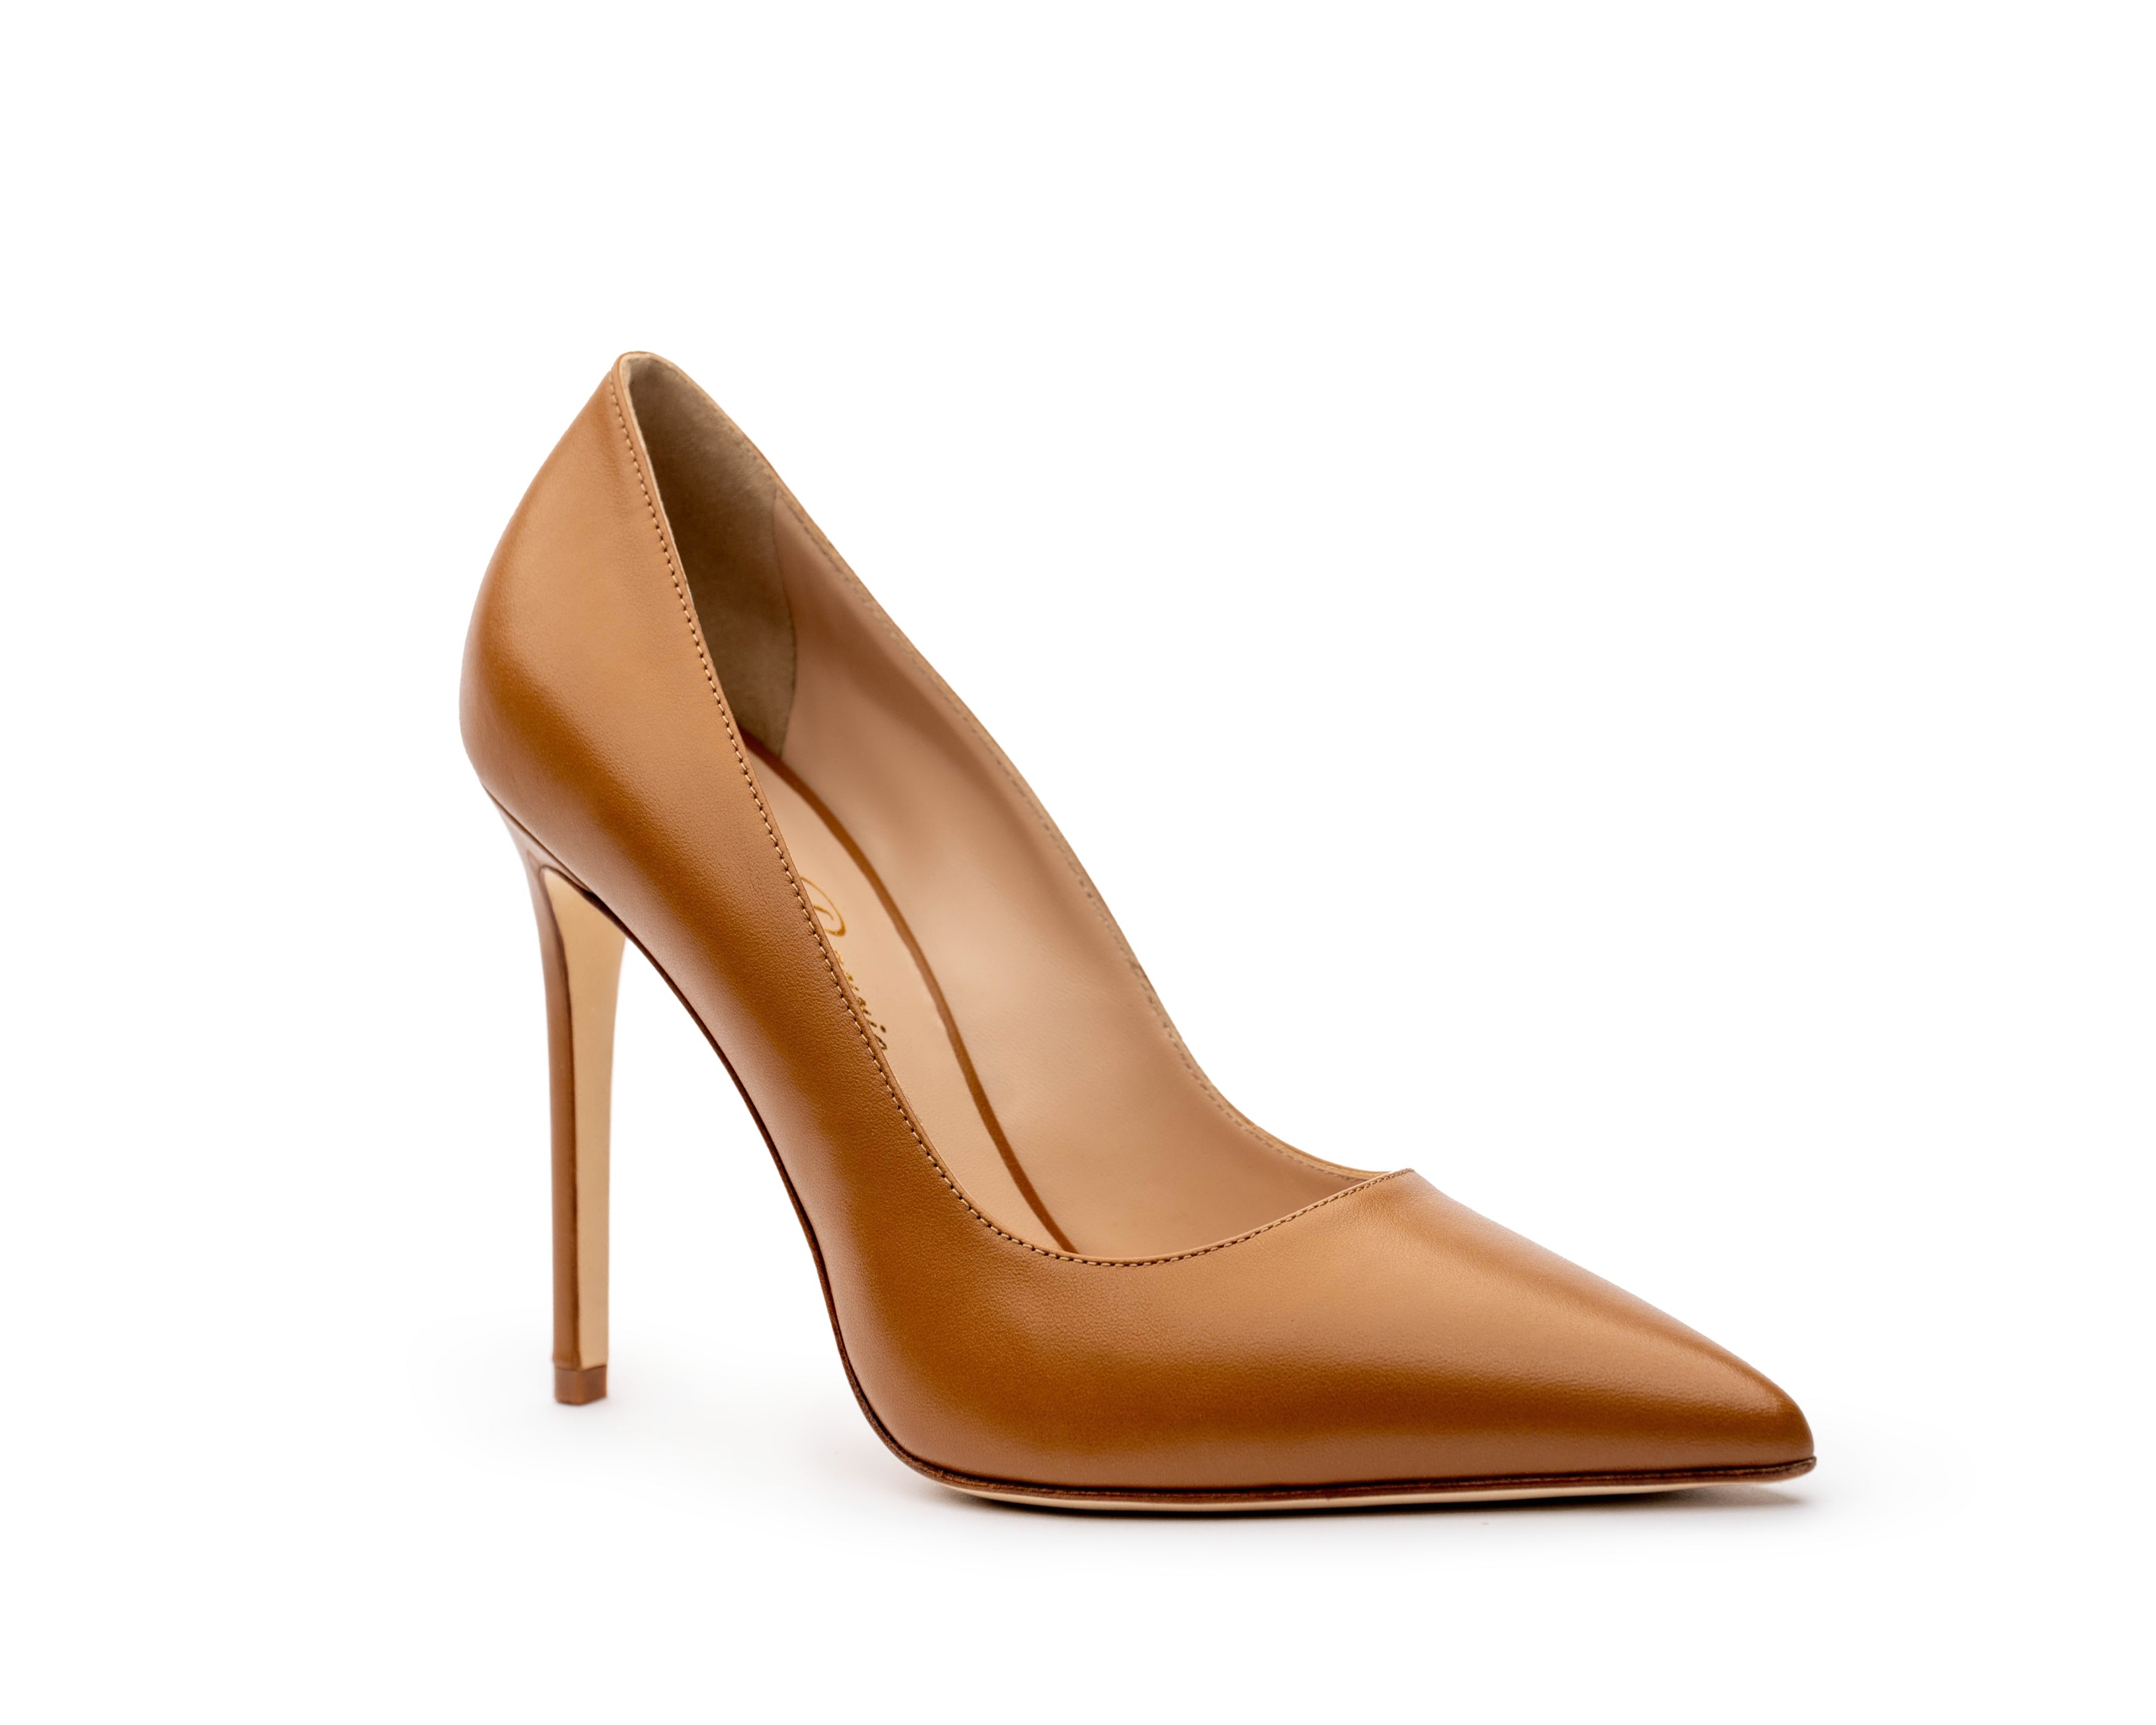 Tan Brown Pumps. Women's Brown High Heels. Nude Pumps. Nude Skin tone women's shoes. Business Shoes. Office Professional High Heels. Tan Brown Color